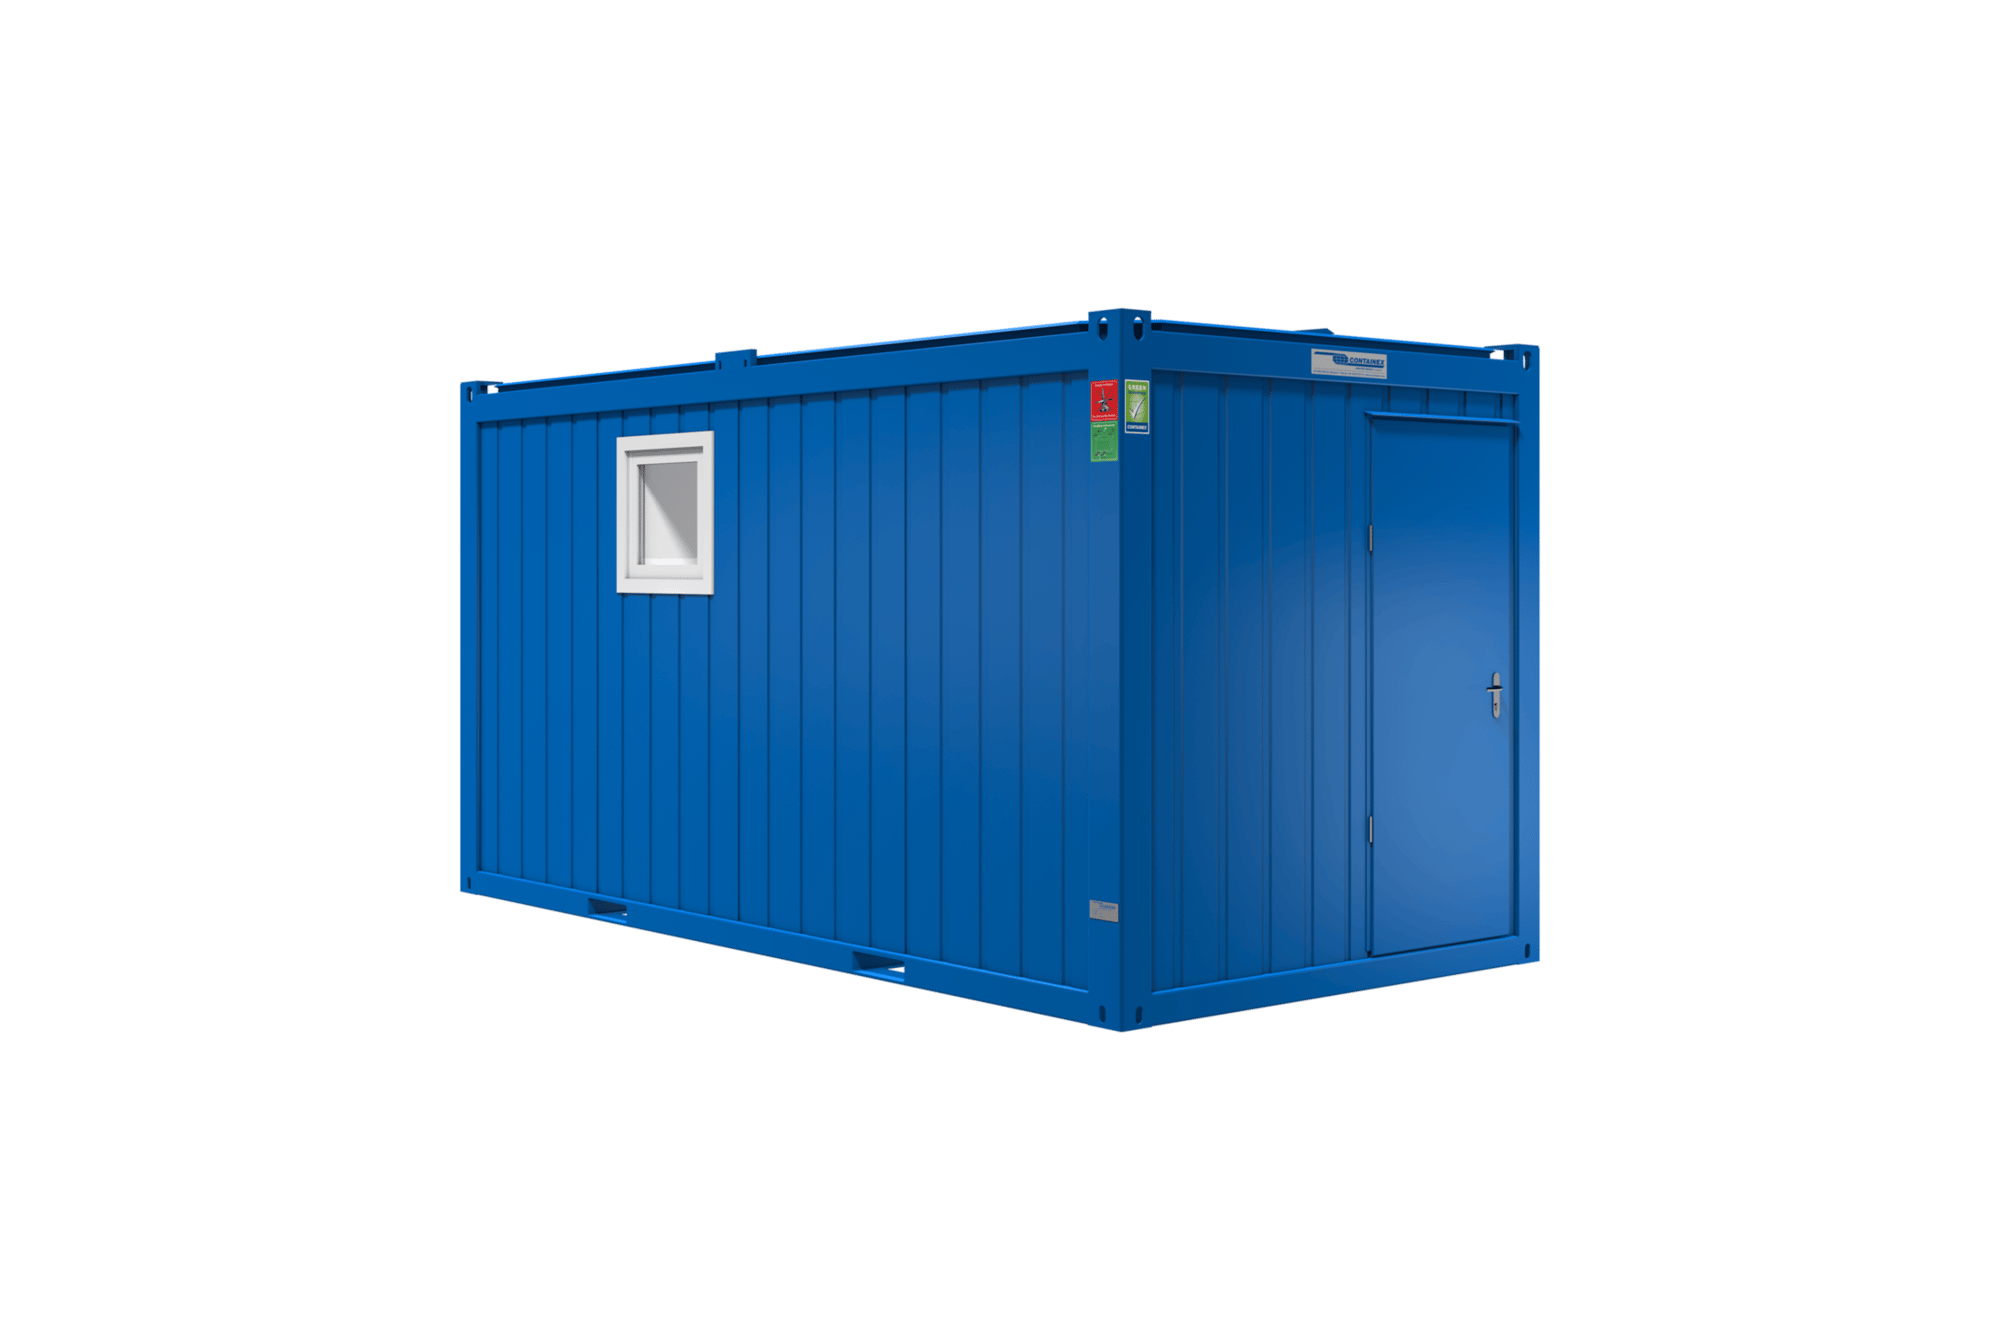 16' Sanitær- og wc-container CONTAINEX CLASSIC Line